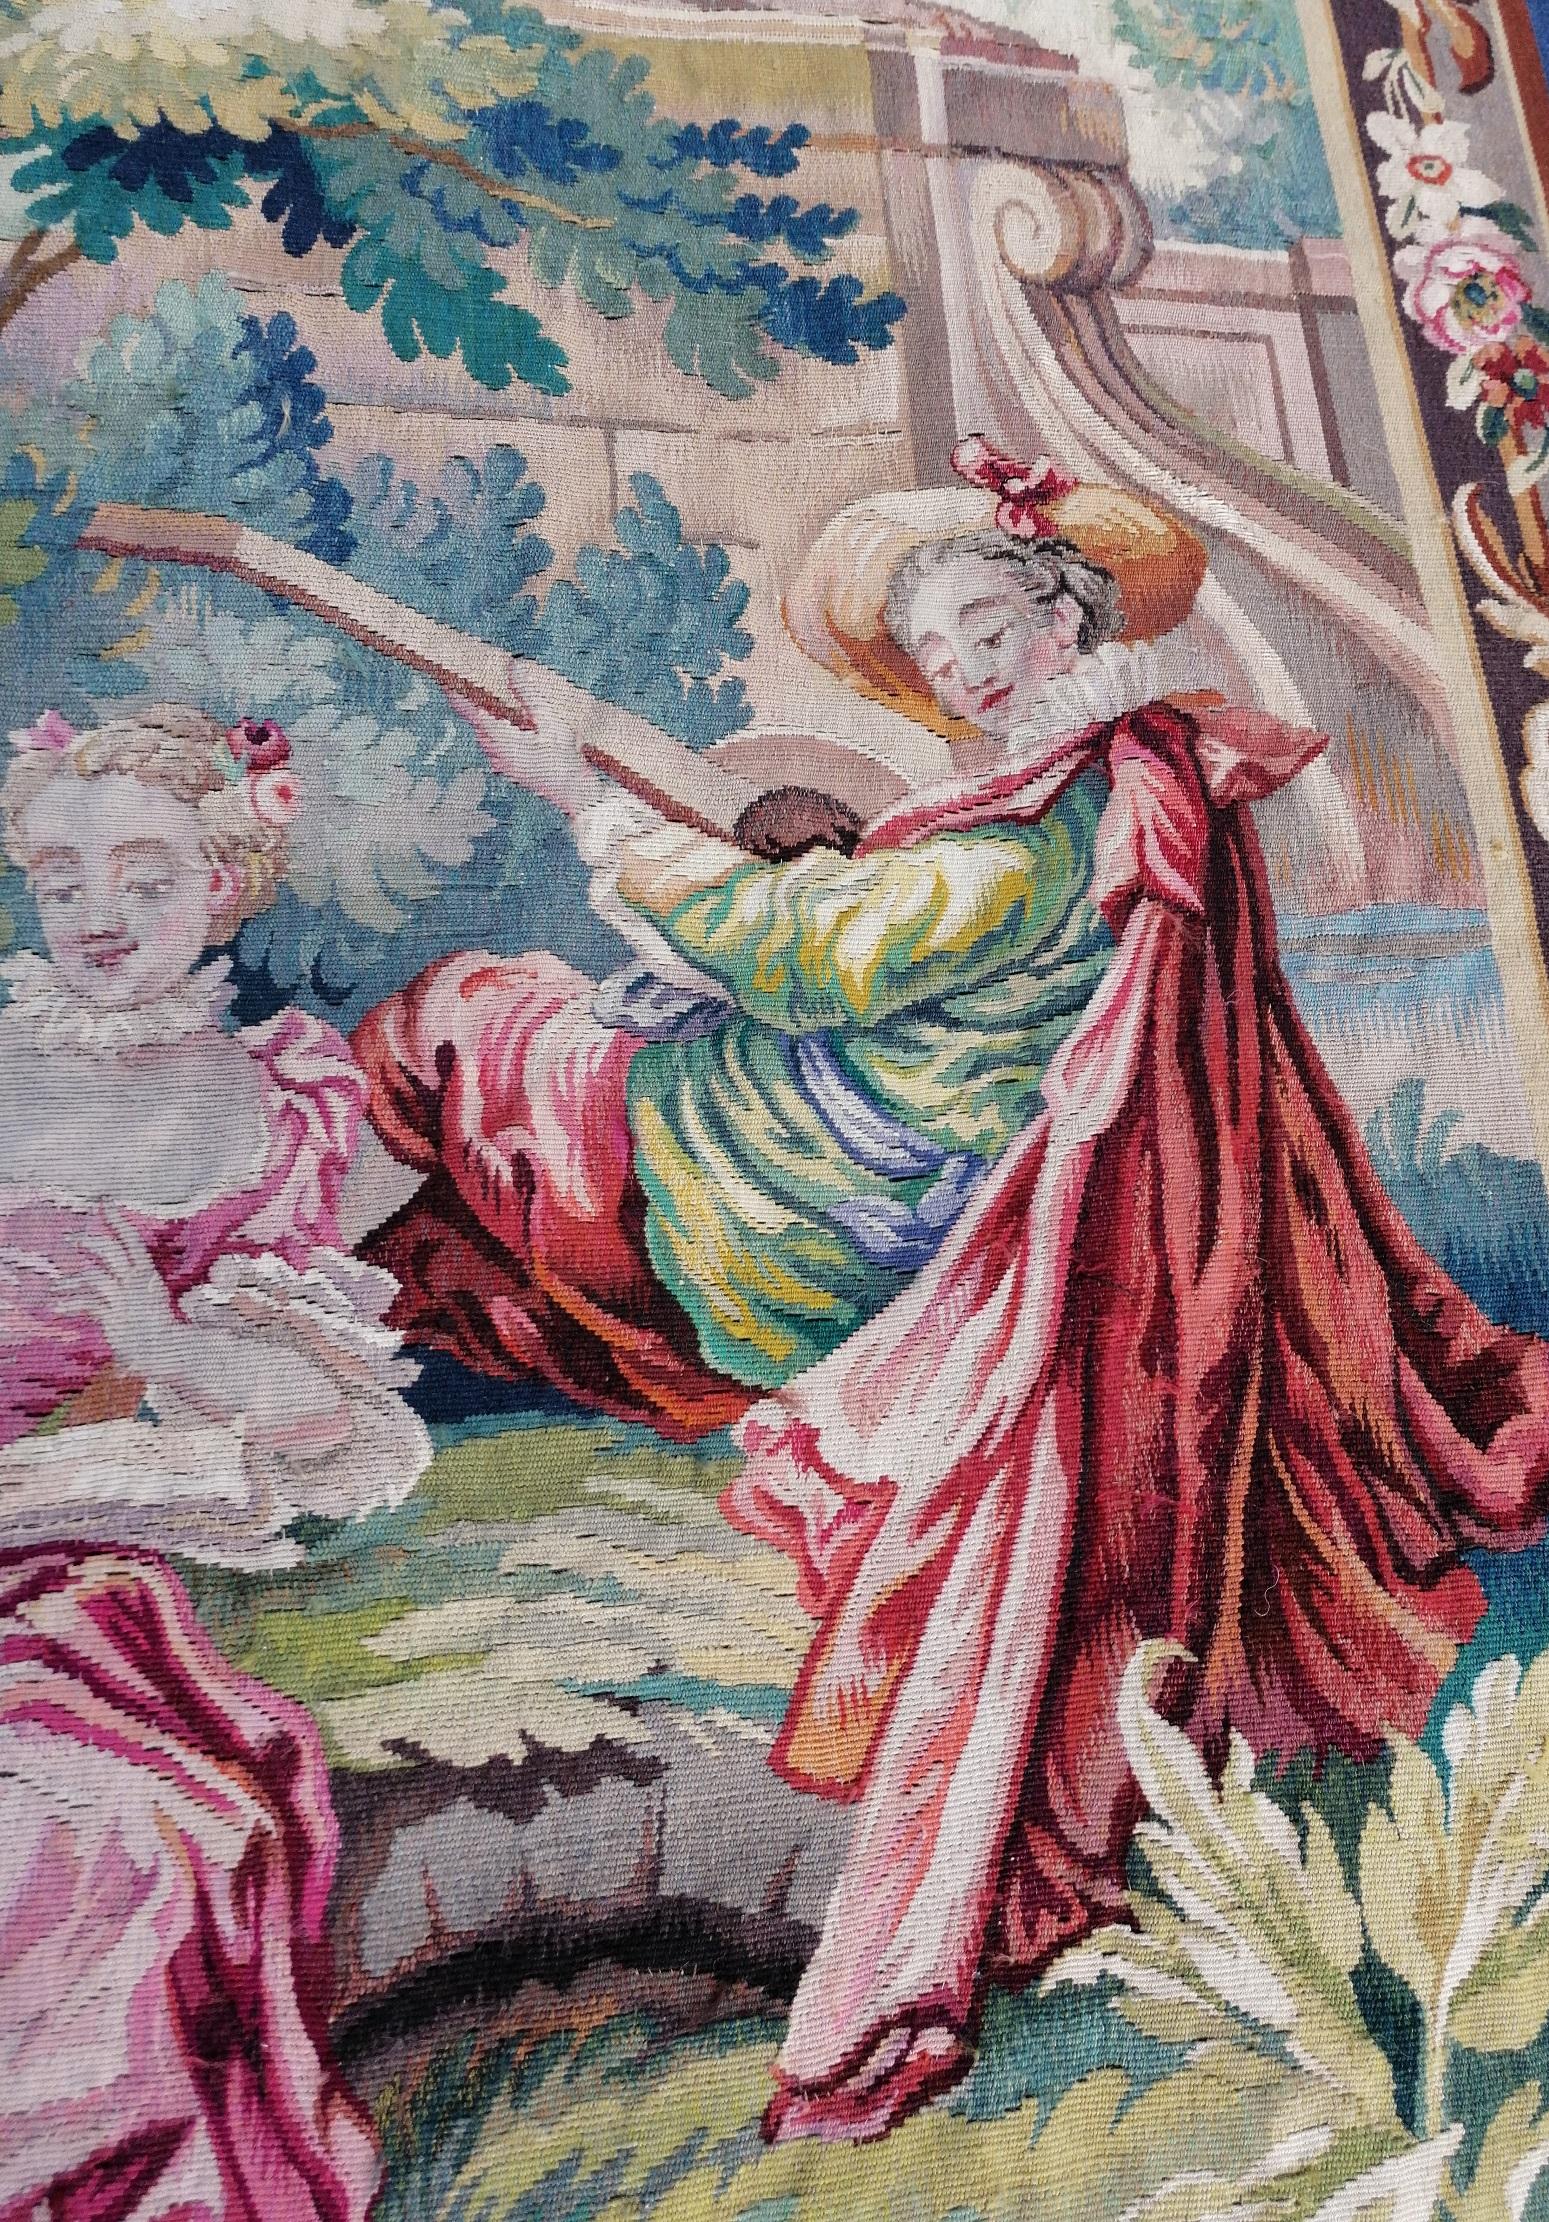  19th Century Aubusson Tapestry - N° 1060 For Sale 2